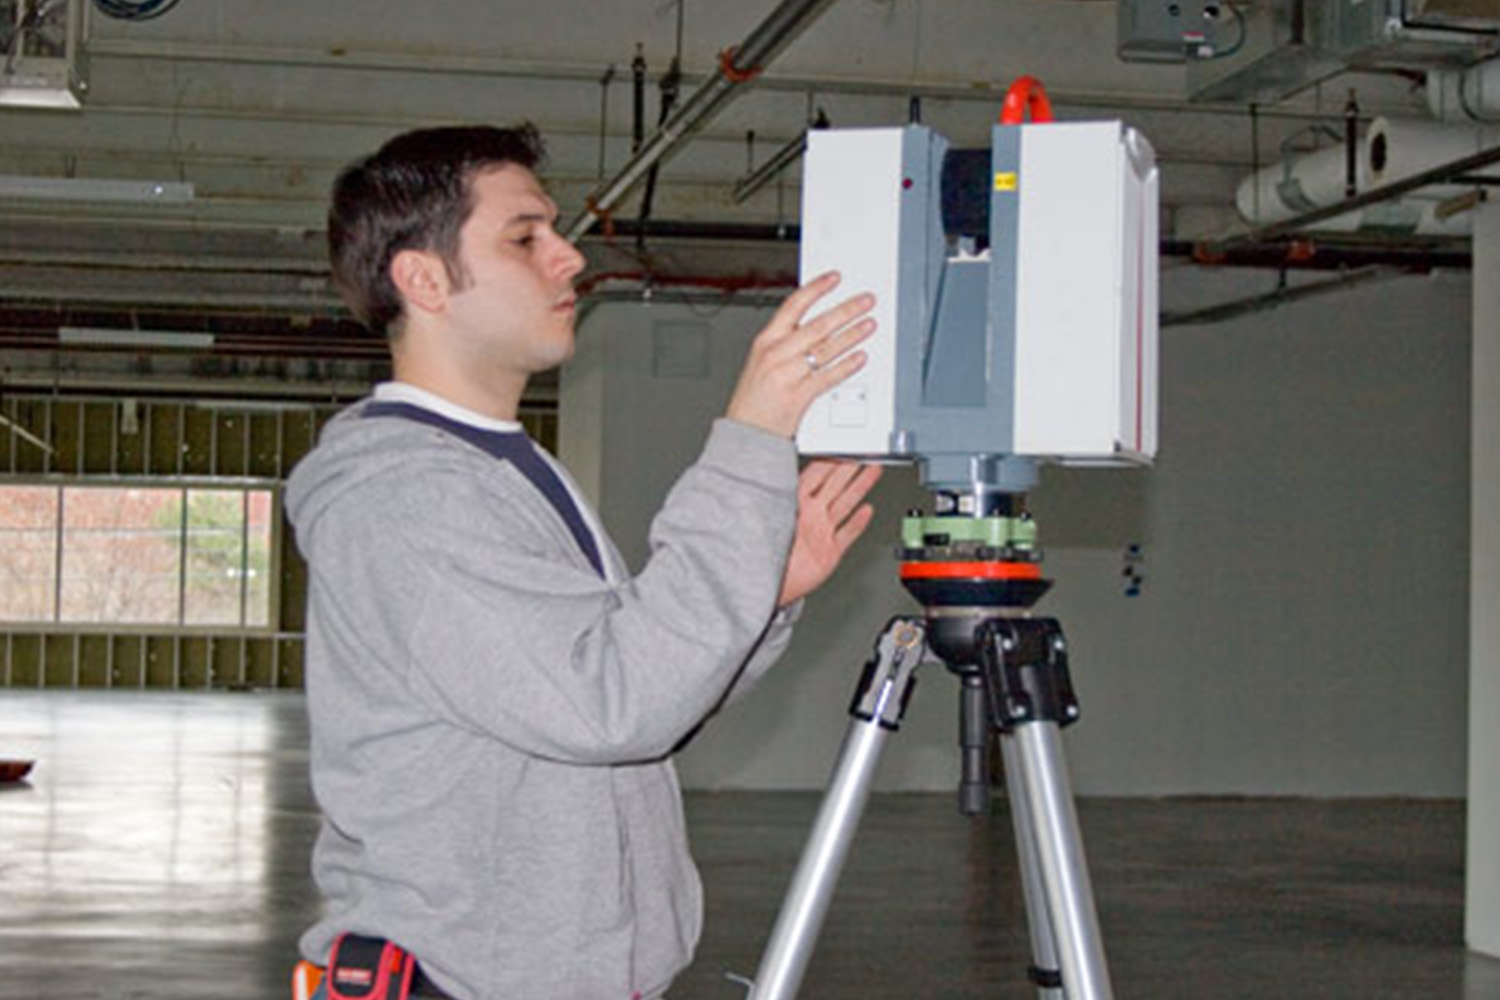 A man laser scans at Autodesk after project award